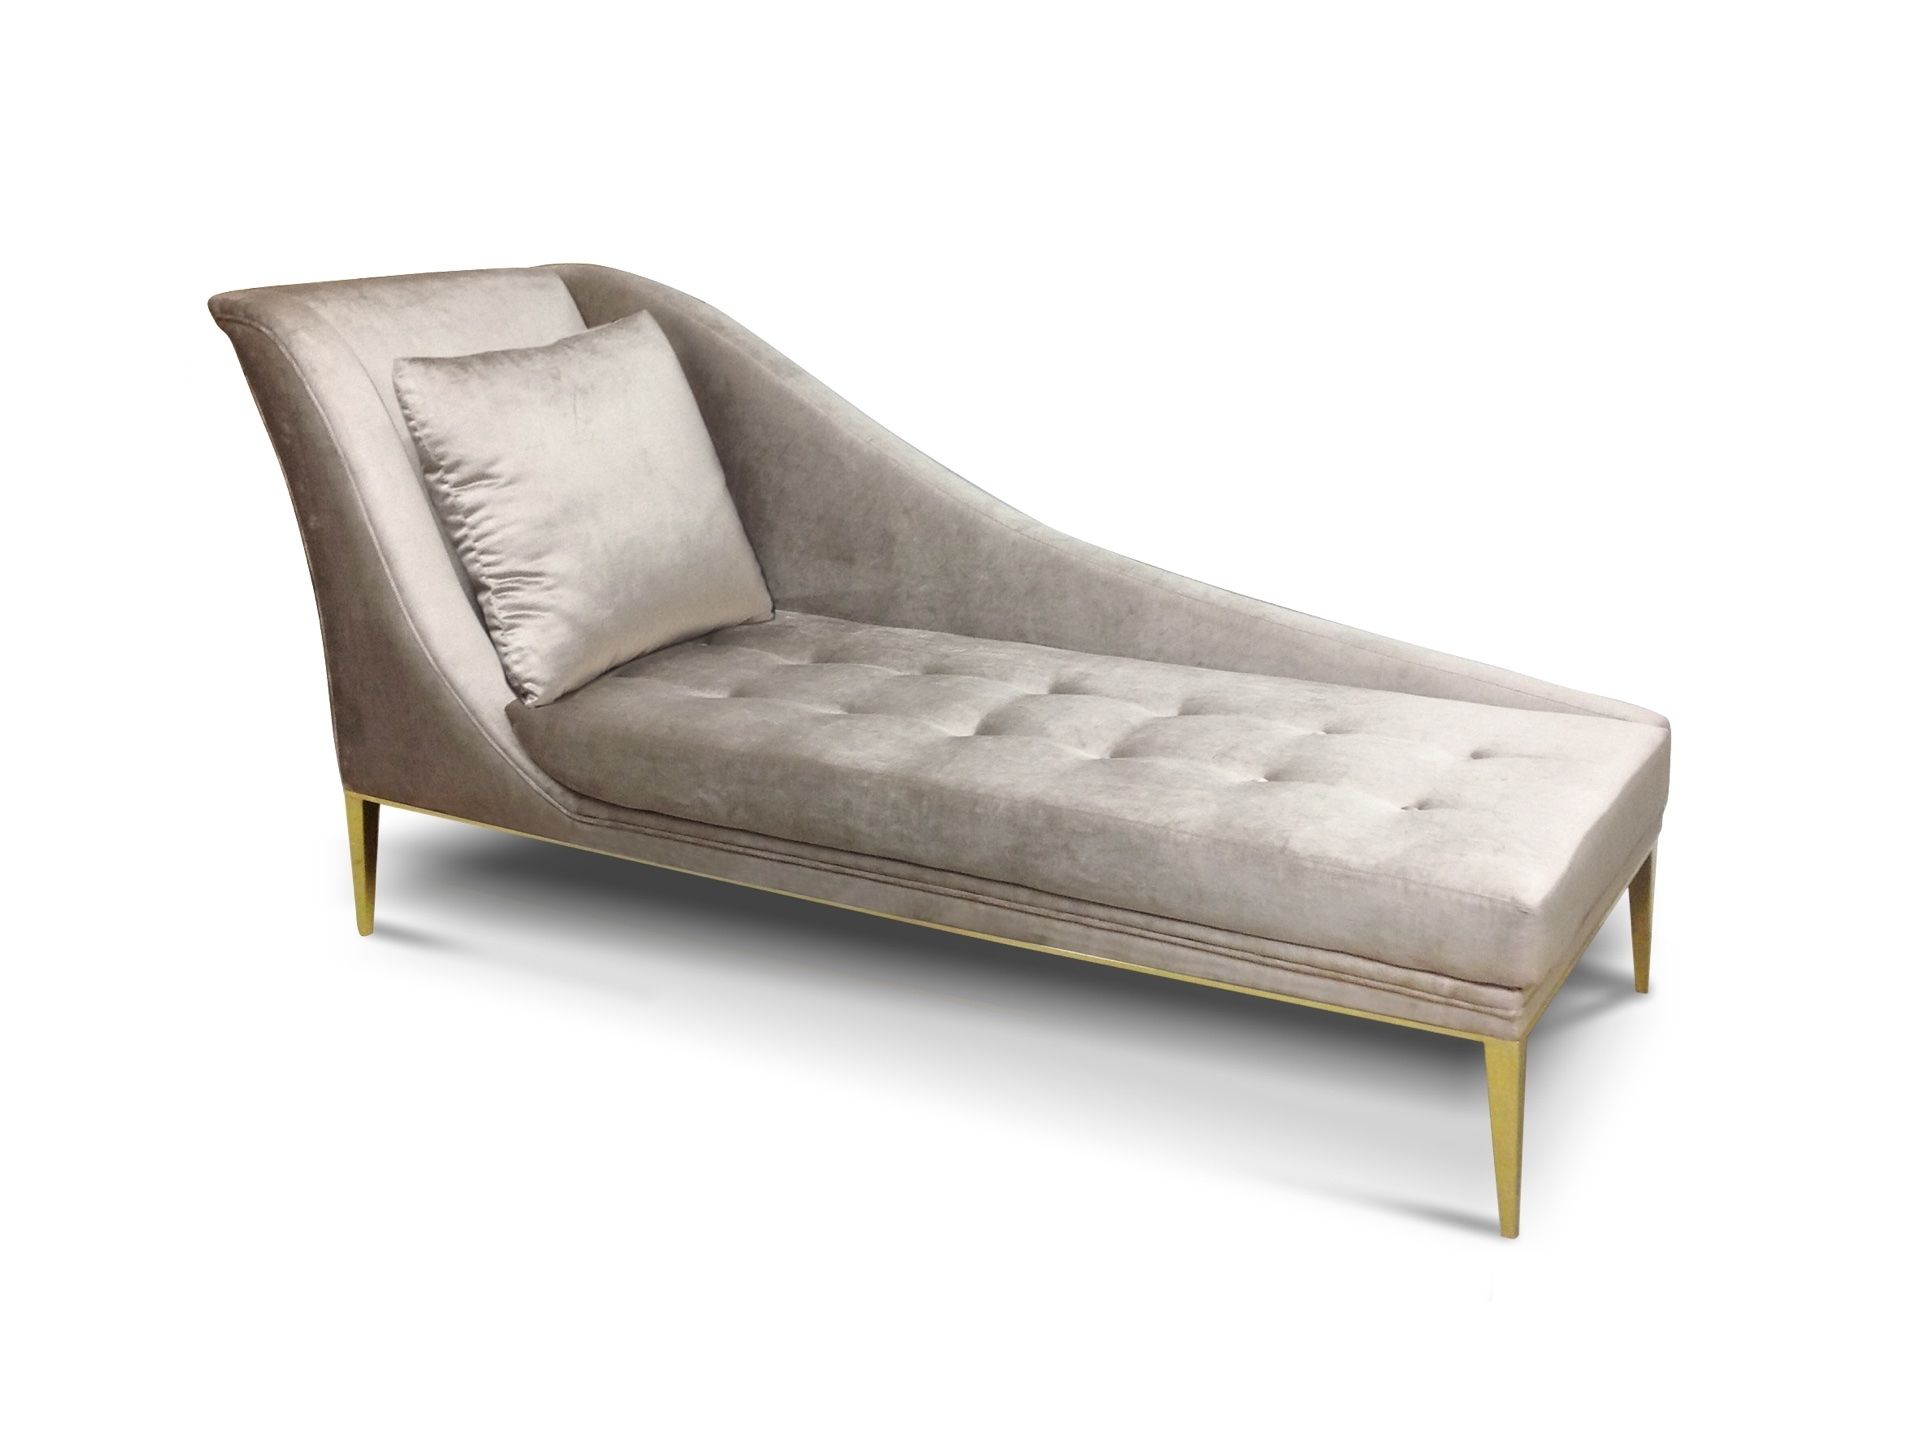 Chaise Benchs In Most Recently Released The Best Benches And Chaises For Your Home Decor (View 9 of 15)